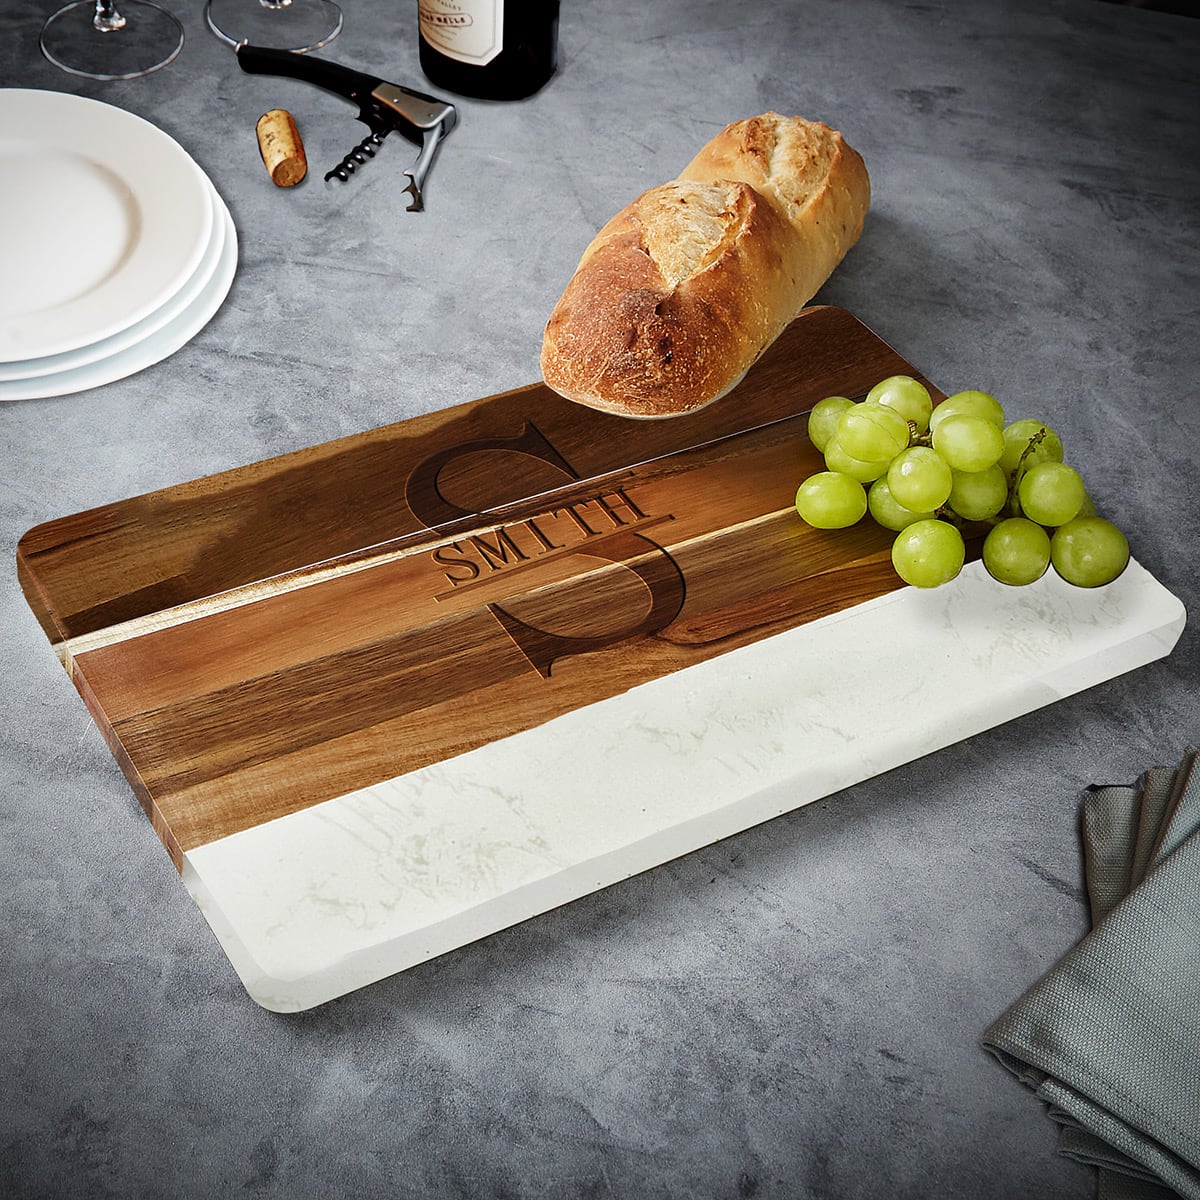 Trieste Personalized Marble Cutting Board - White Marble and Acacia Wood Cheese Board 16 x 9 x 1 inch